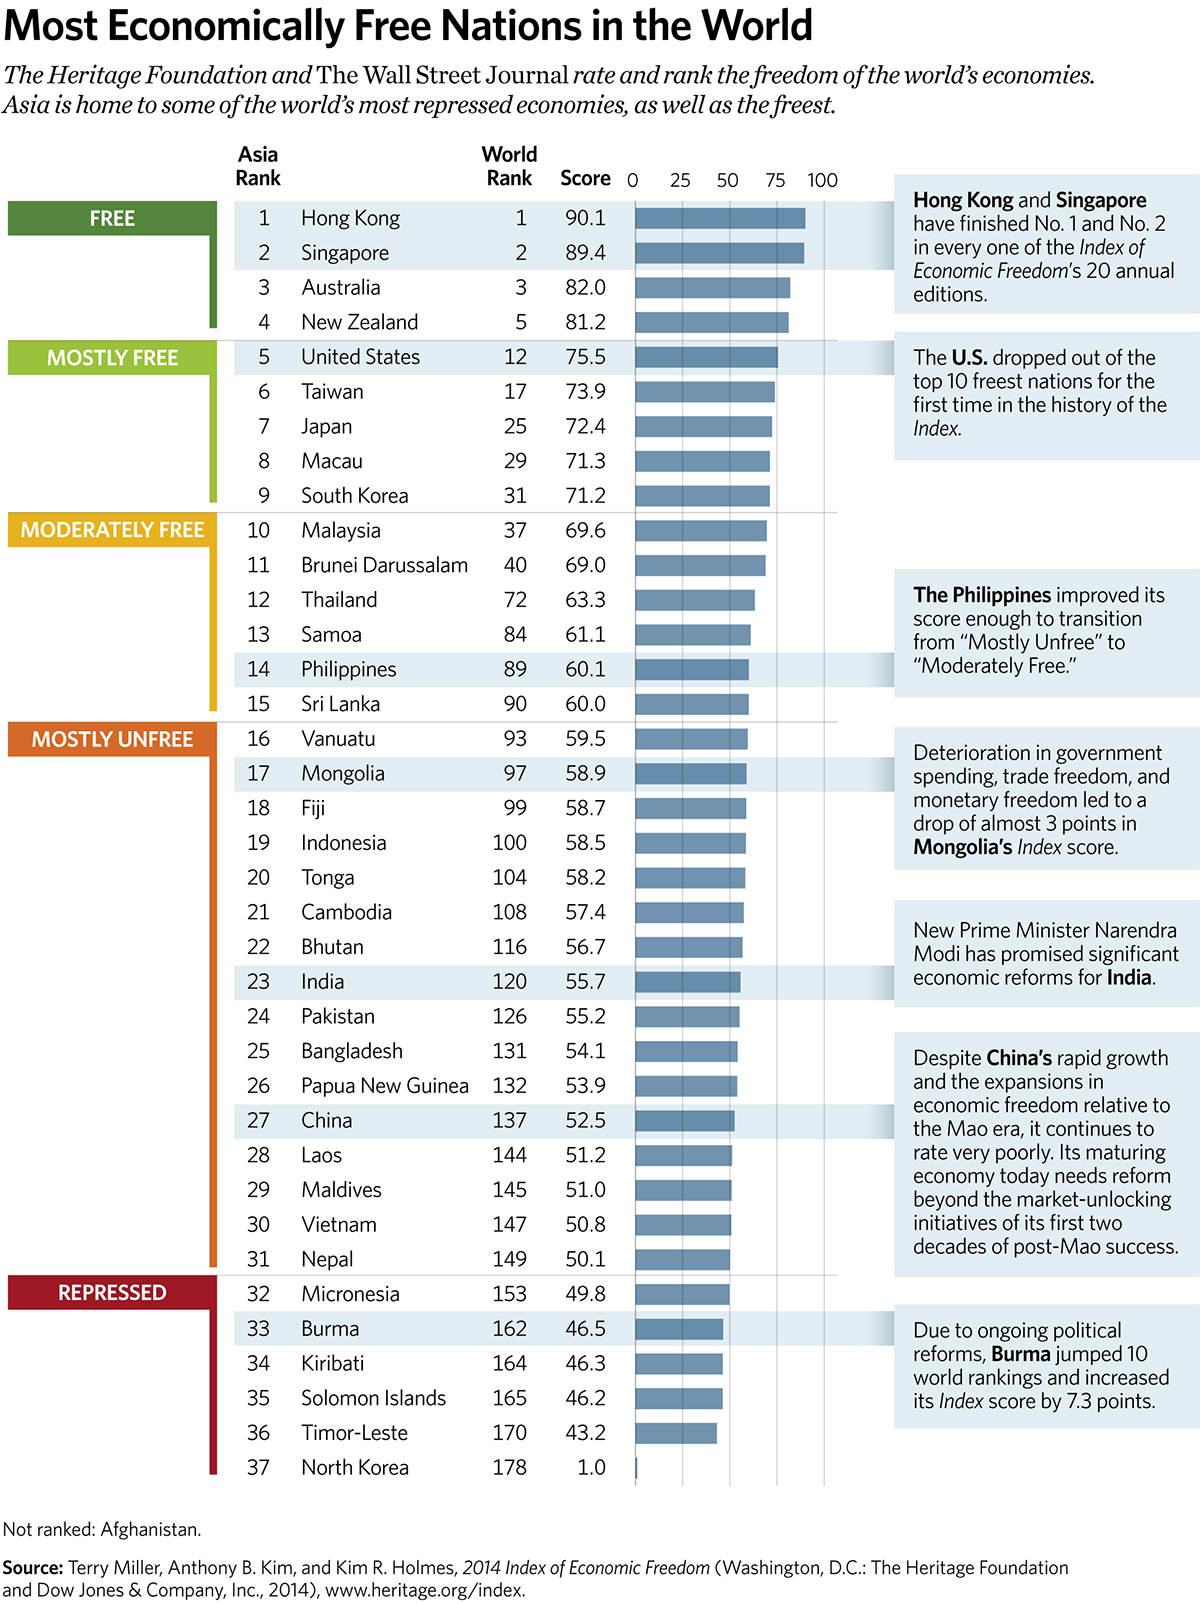 Most Economically Free Nations in the World